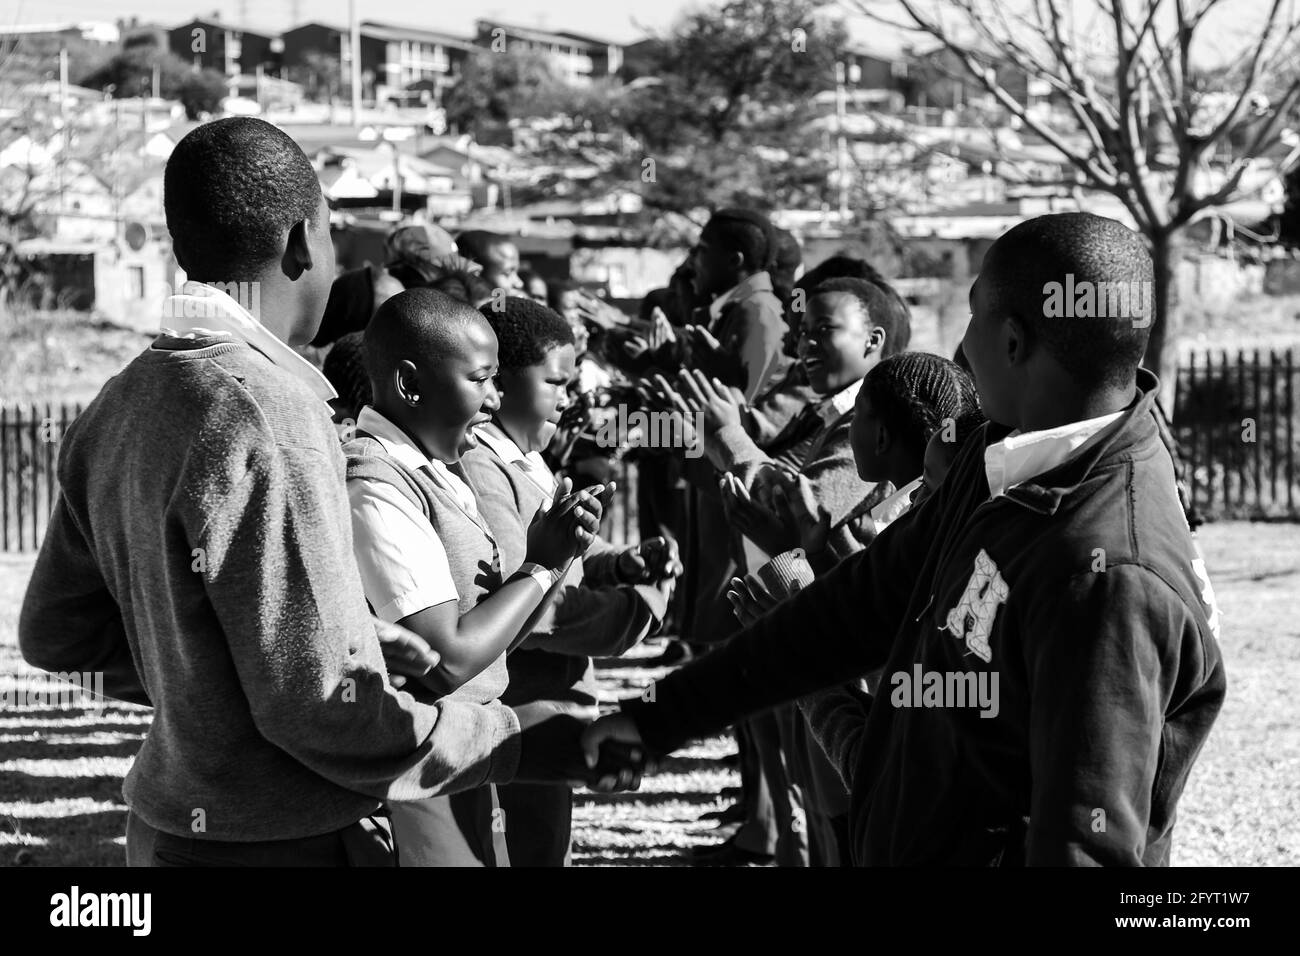 JOHANNESBURG, SOUTH AFRICA - Jan 05, 2021: Johannesburg, South Africa - June 19, 2014: Diverse African high school pupils playing physical games on th Stock Photo